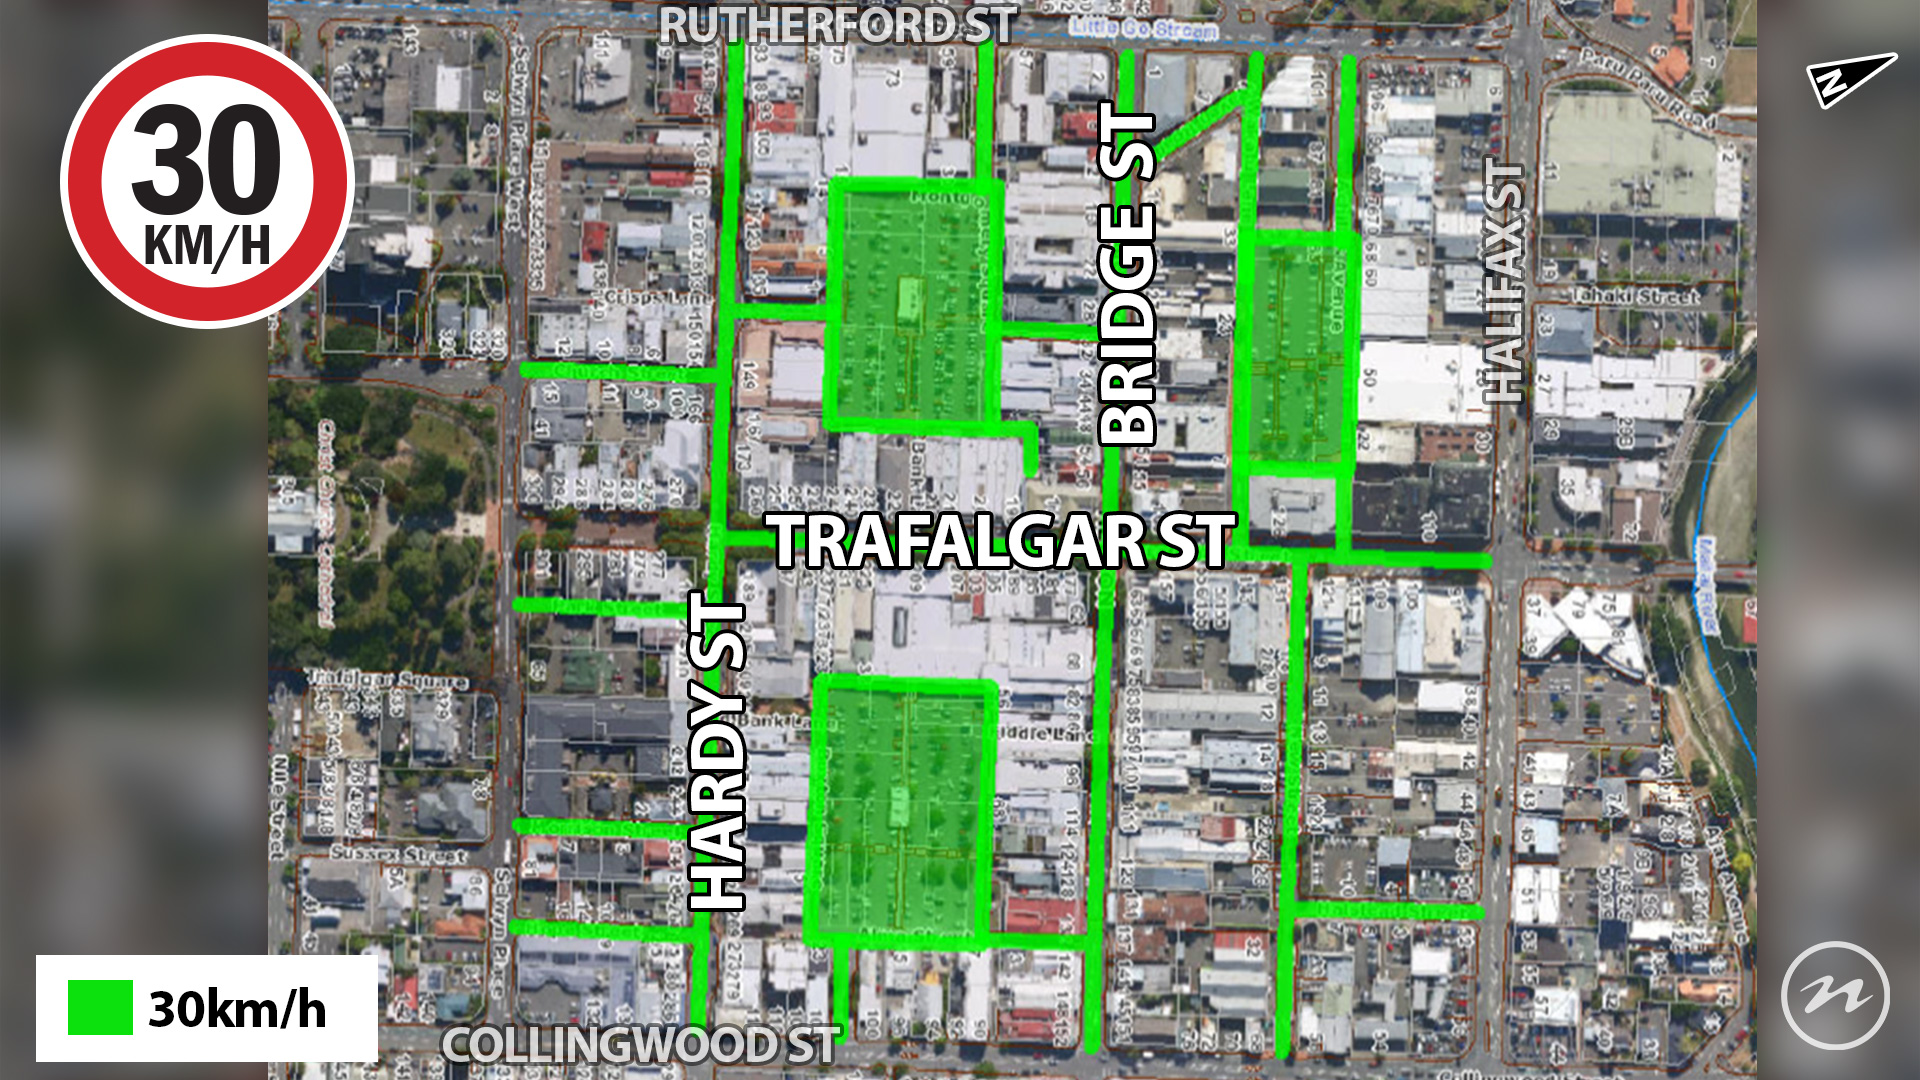 The green represents the Nelson city centre streets which will be 30km/hr from Saturday 9 May.